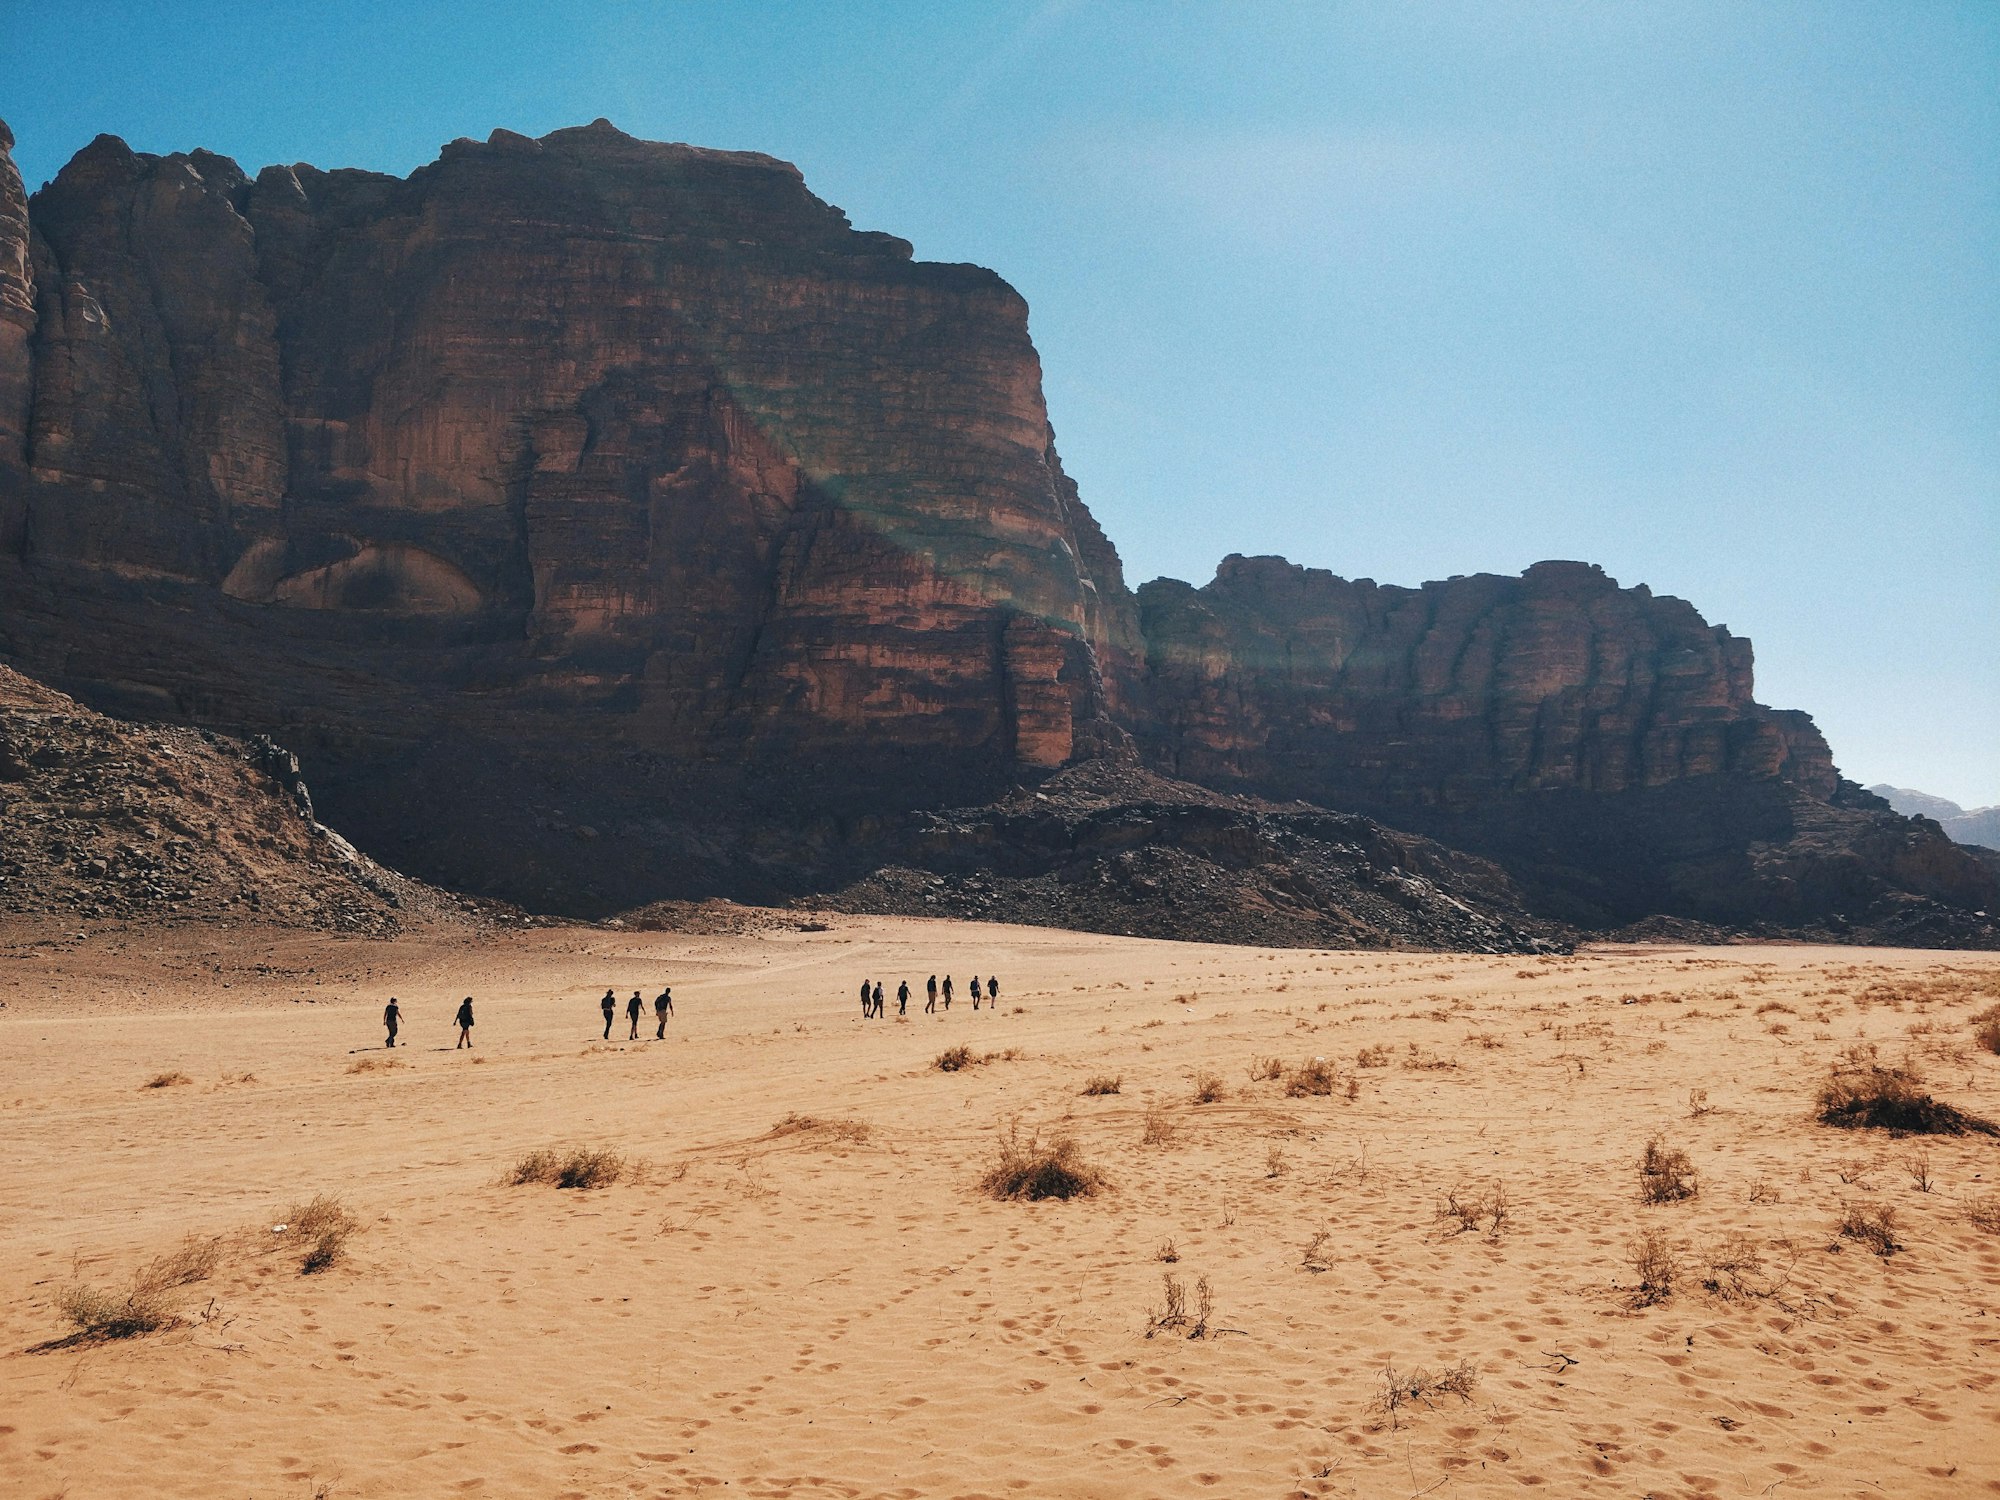 This photo was taken in late 2017, in the Wadi Rum desert in Jordan – the most beautiful place I have ever been. The immense mountains and orange sand contrasting with the blue sky. A truly remarkable sight.